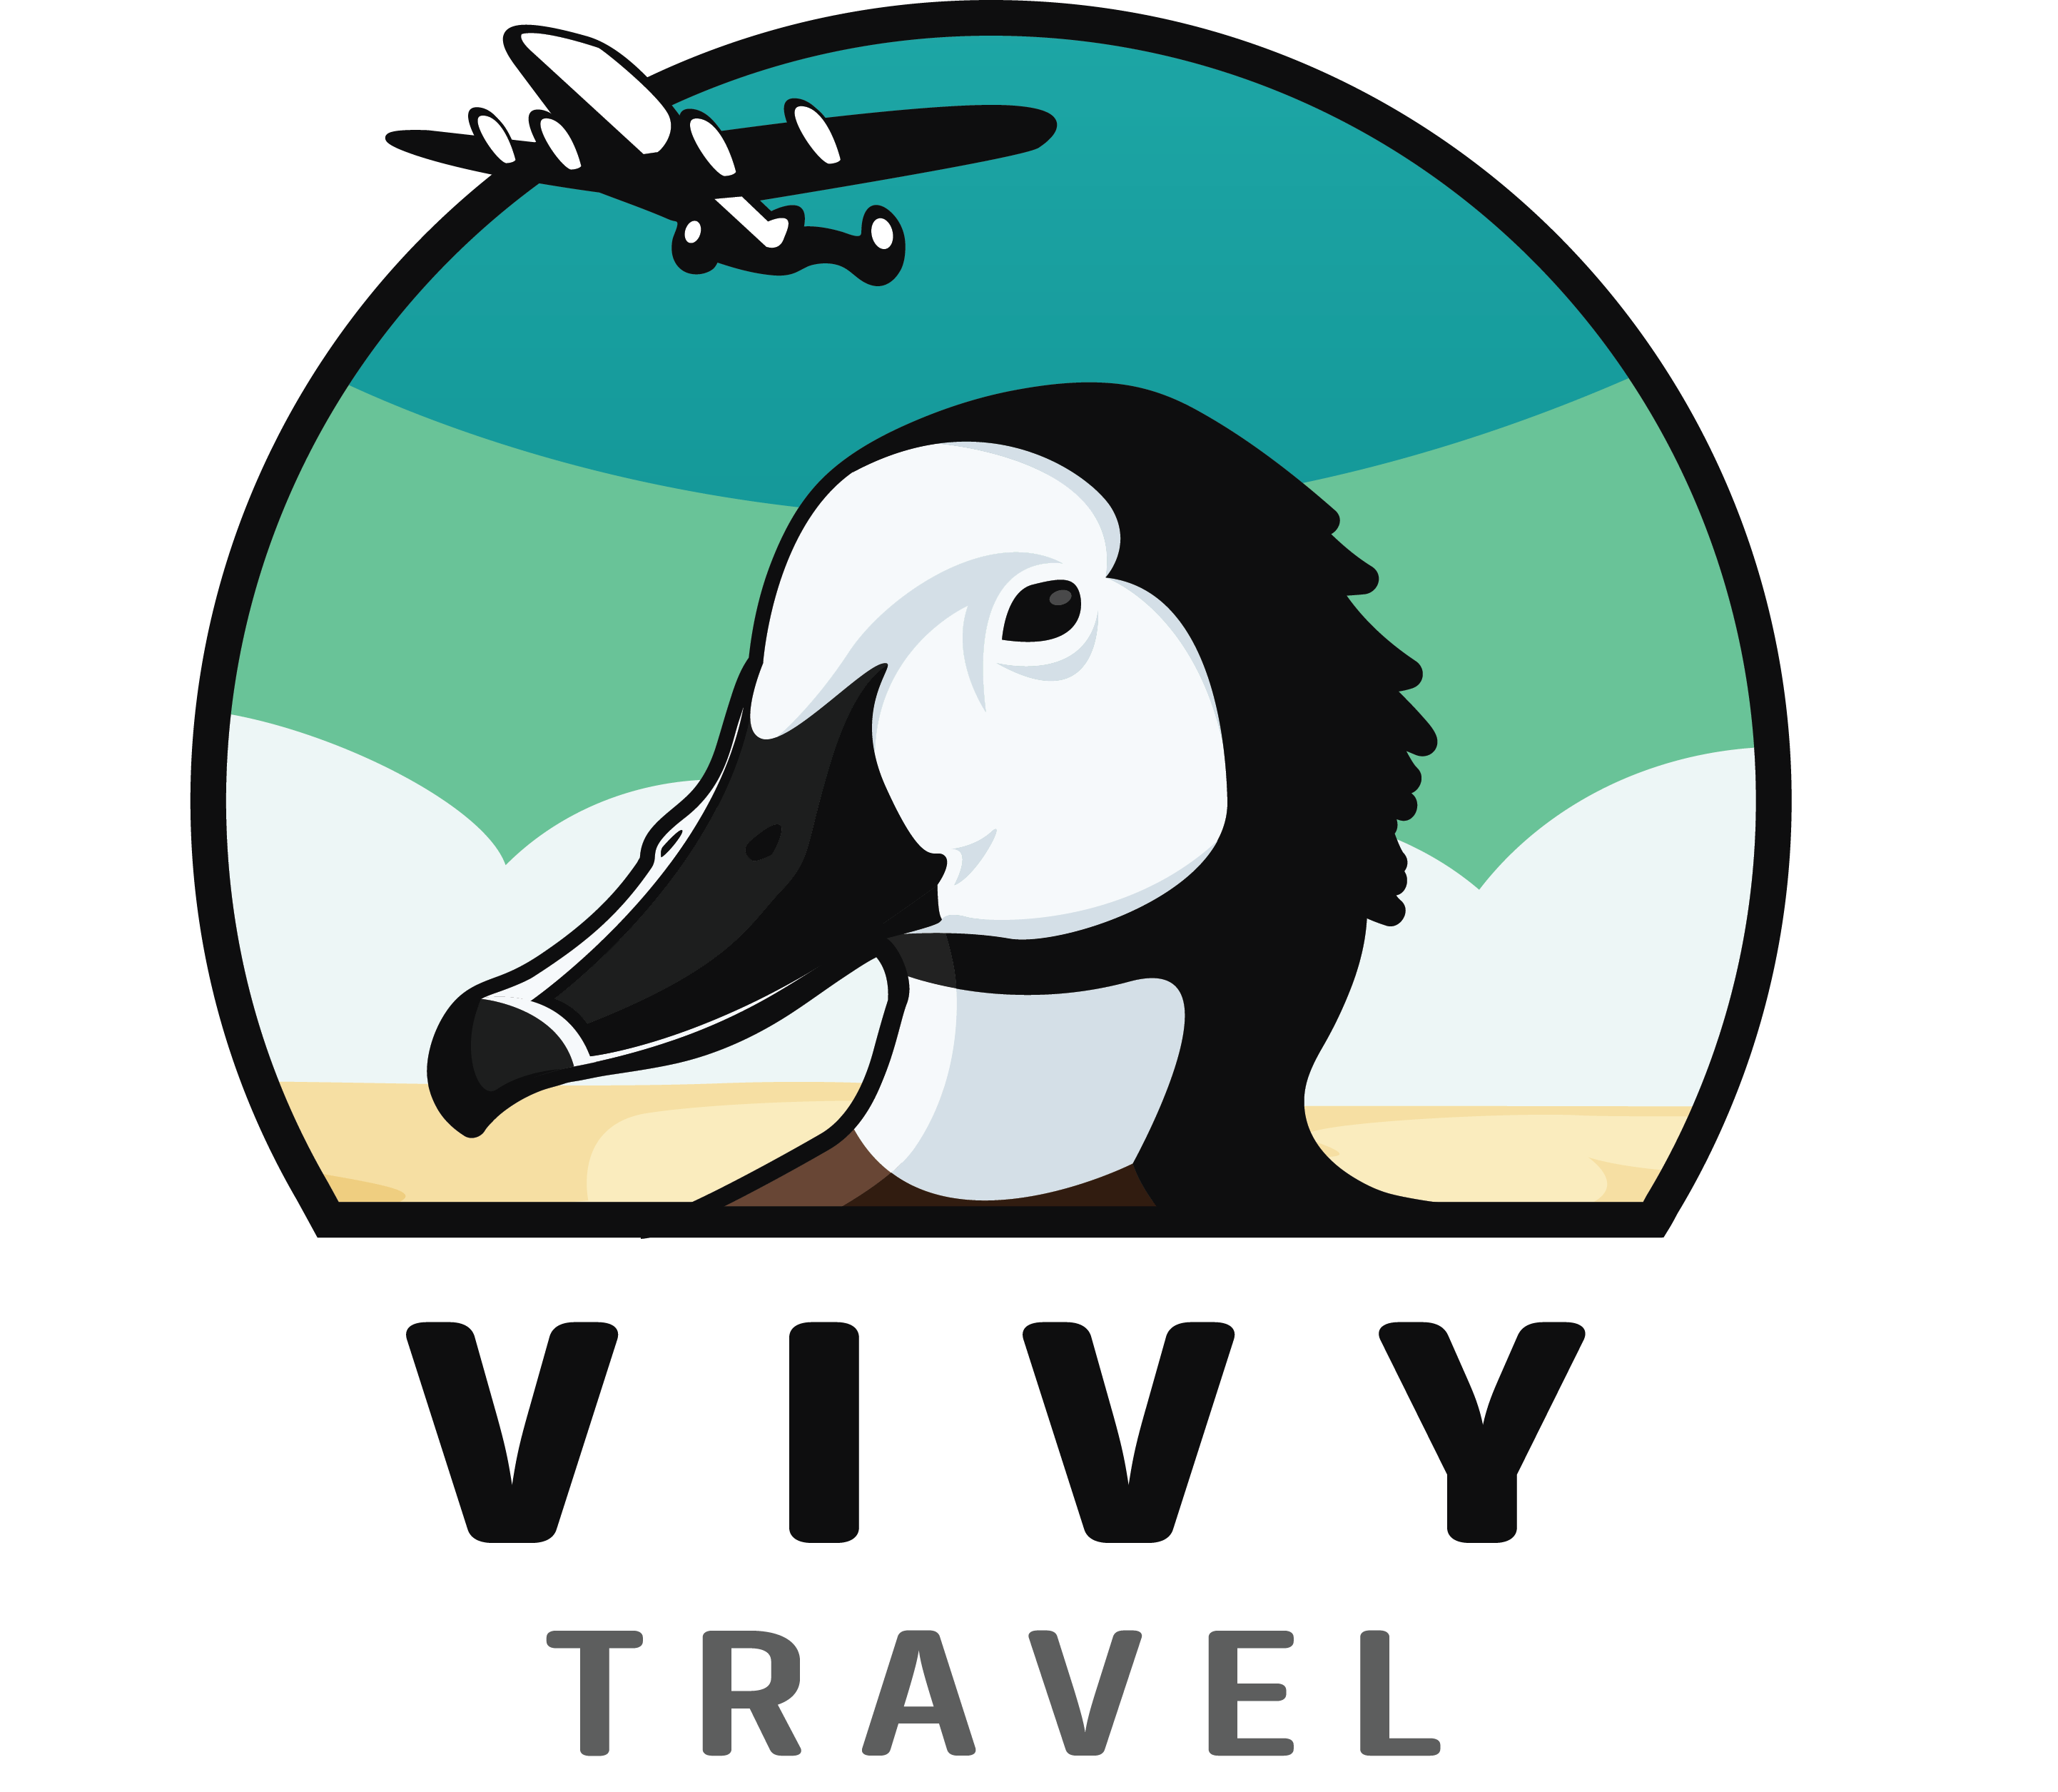 Vivy Travel terms and conditions